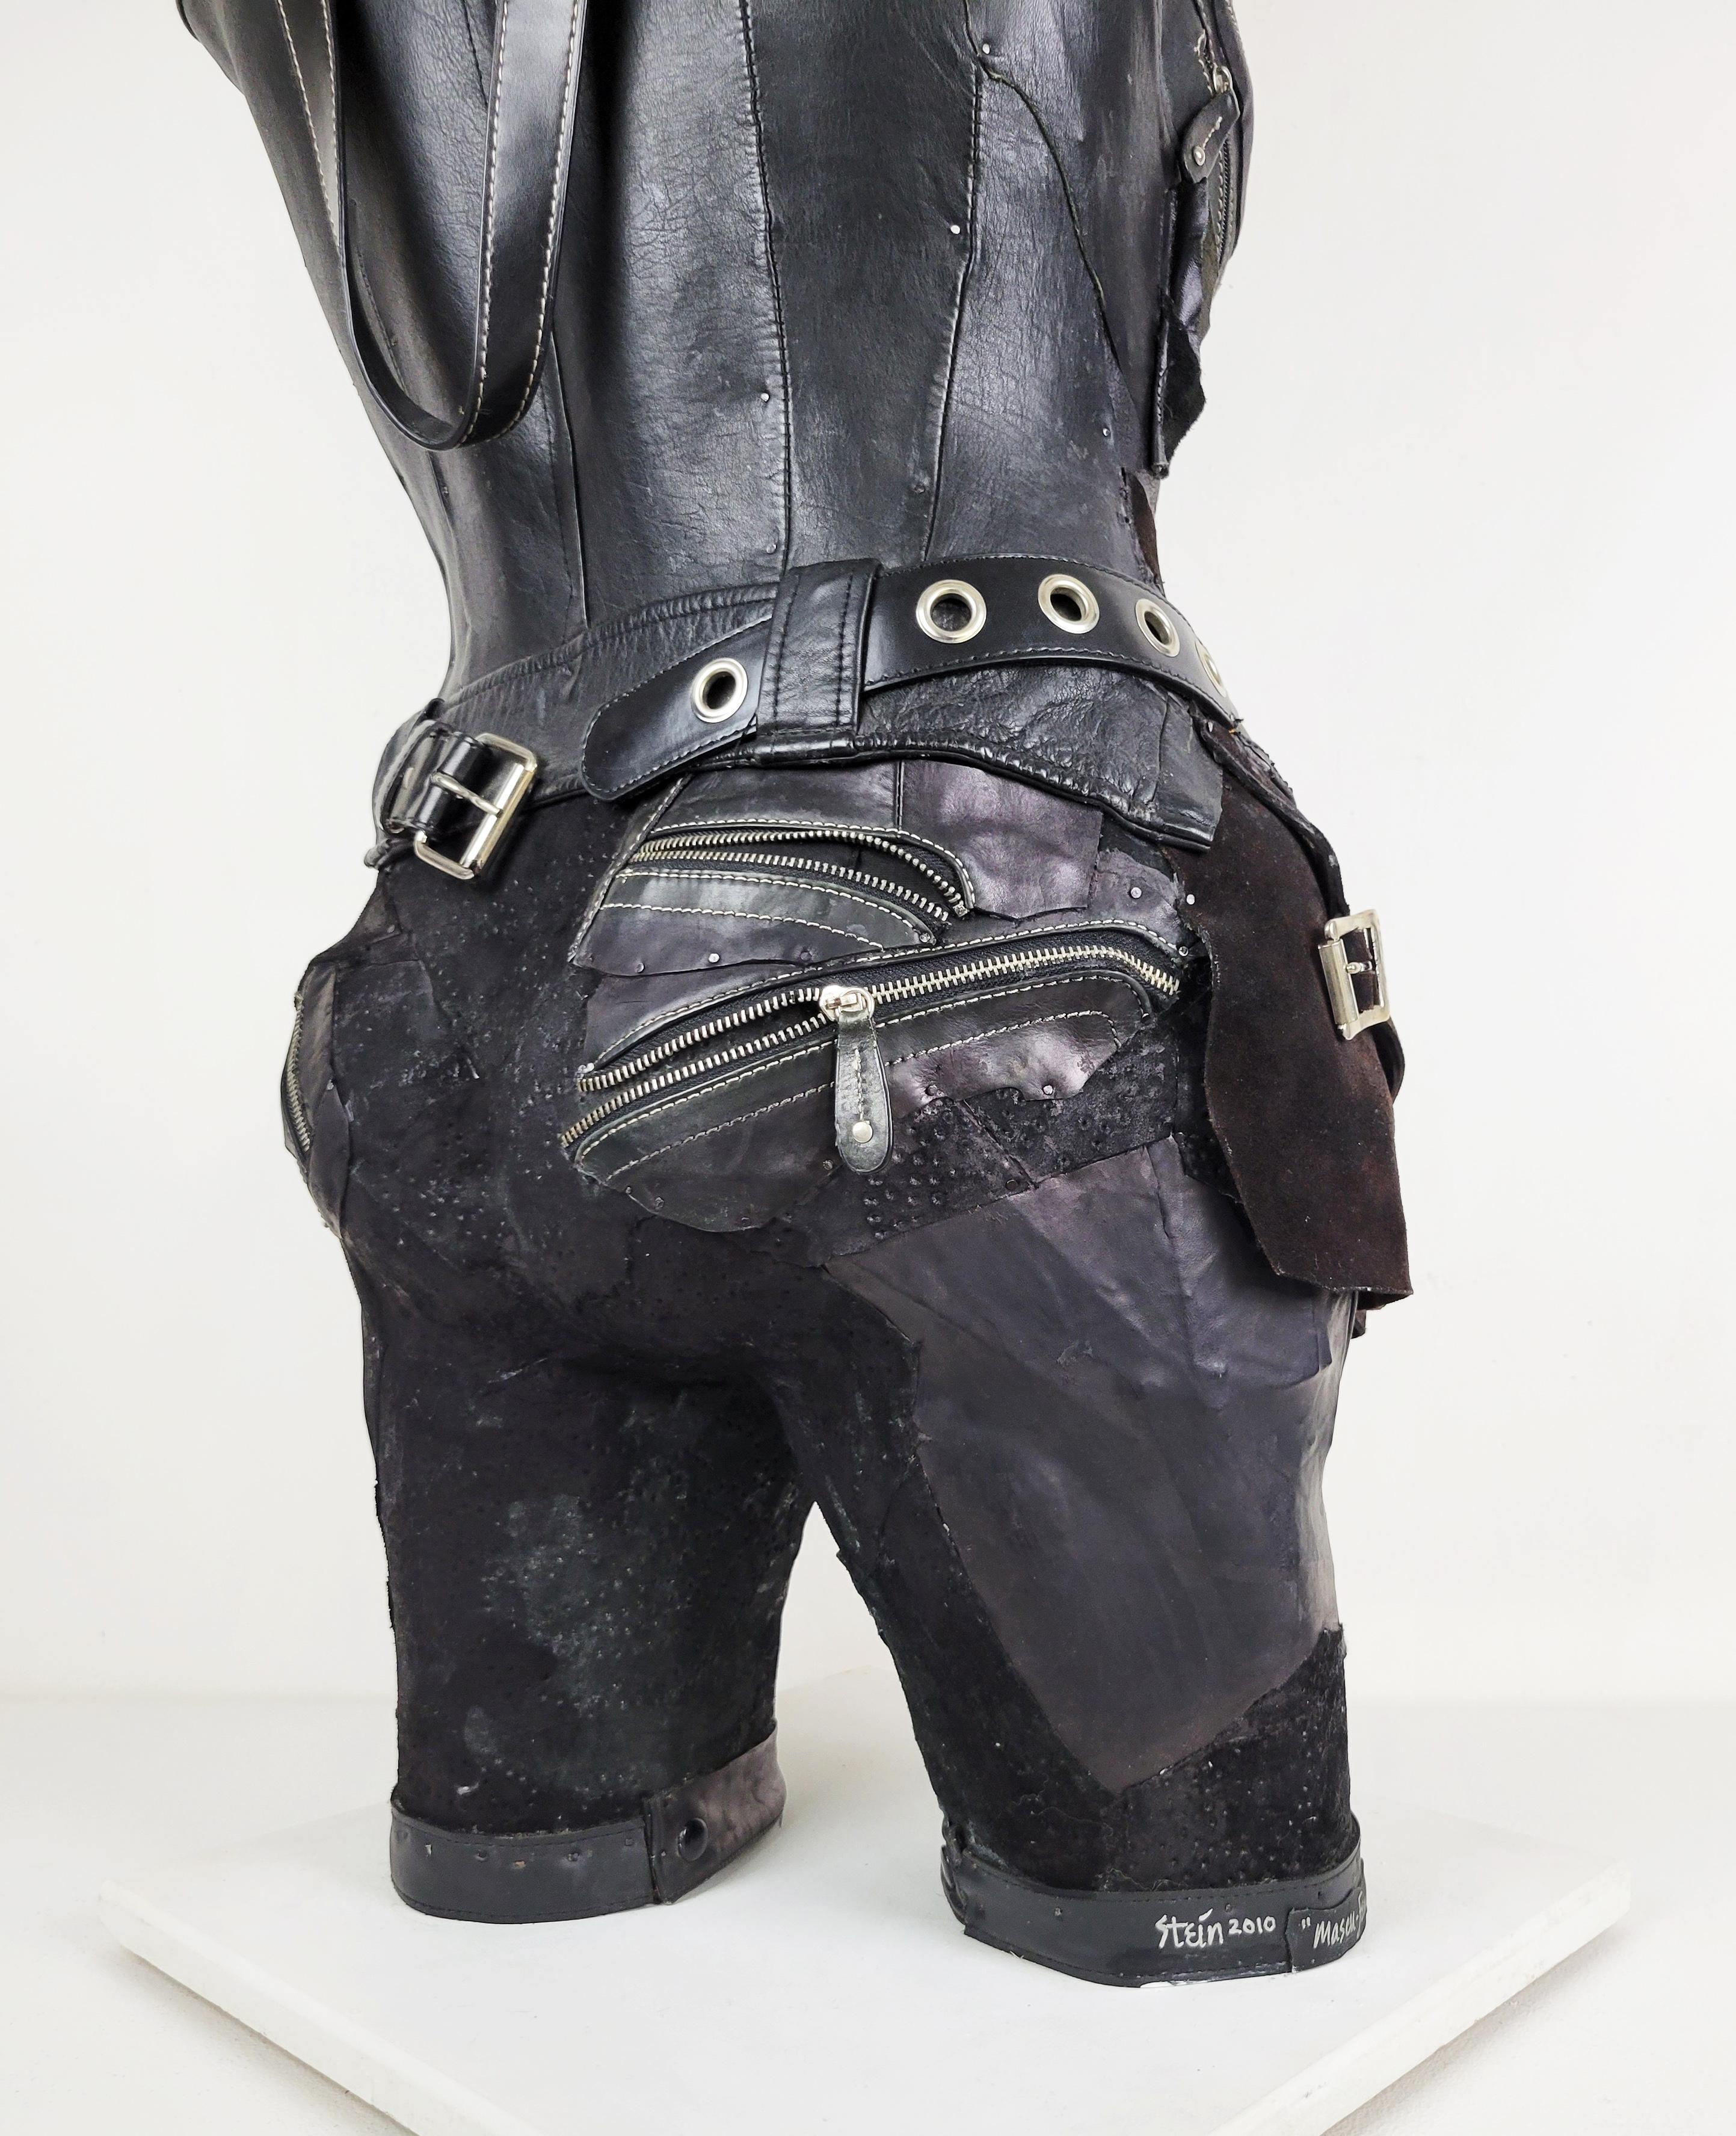 Feminist Contemporary Black/Silver Leather Metal Torso Sculpture - MascuFem 681  For Sale 5